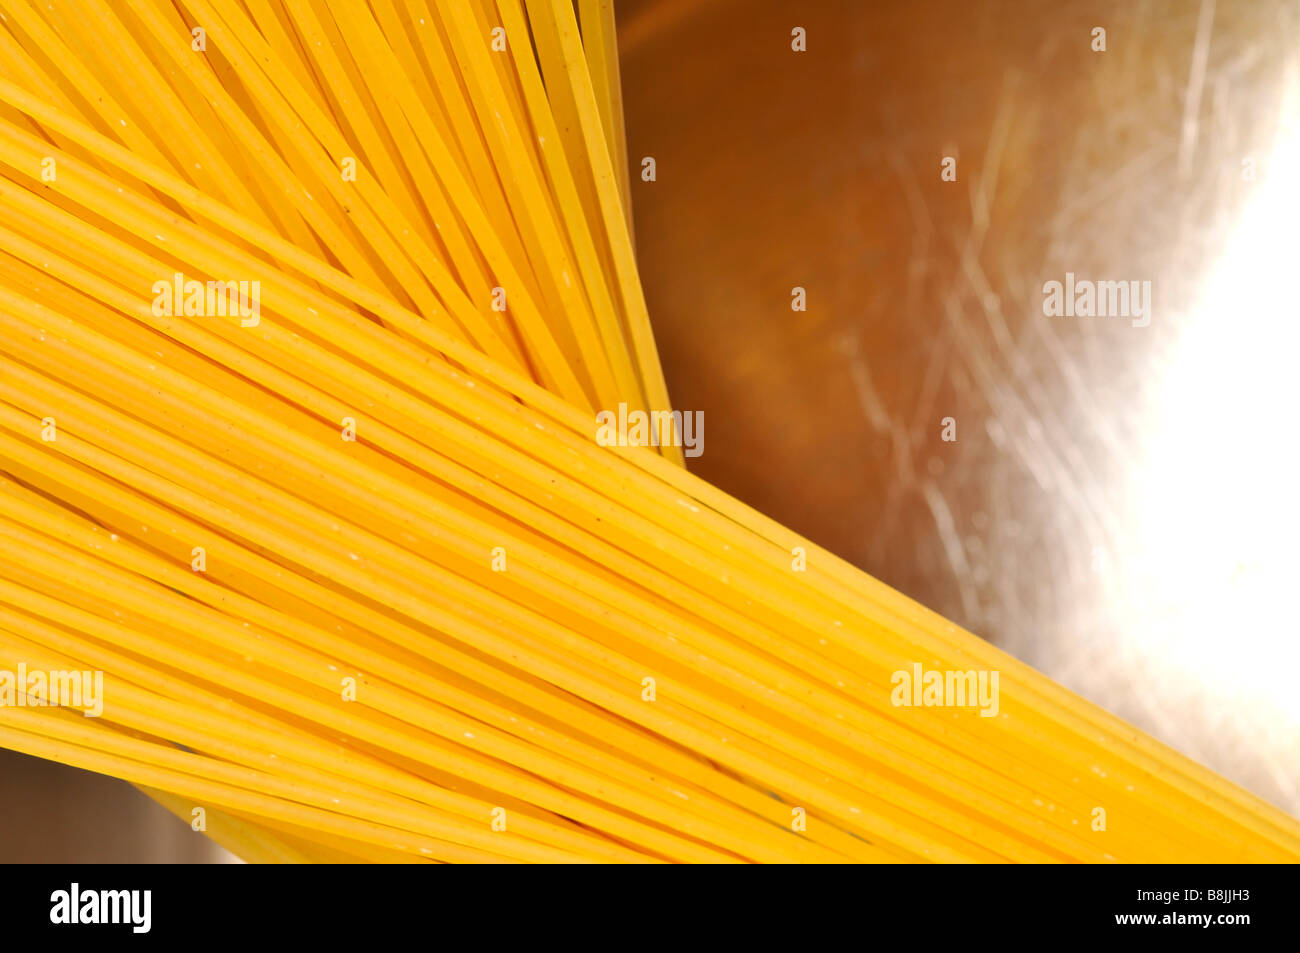 dried spaghetti in stainless steel pan uncooked raw water italian food carbohydrates bolognese kitchen utensil cooking white bac Stock Photo